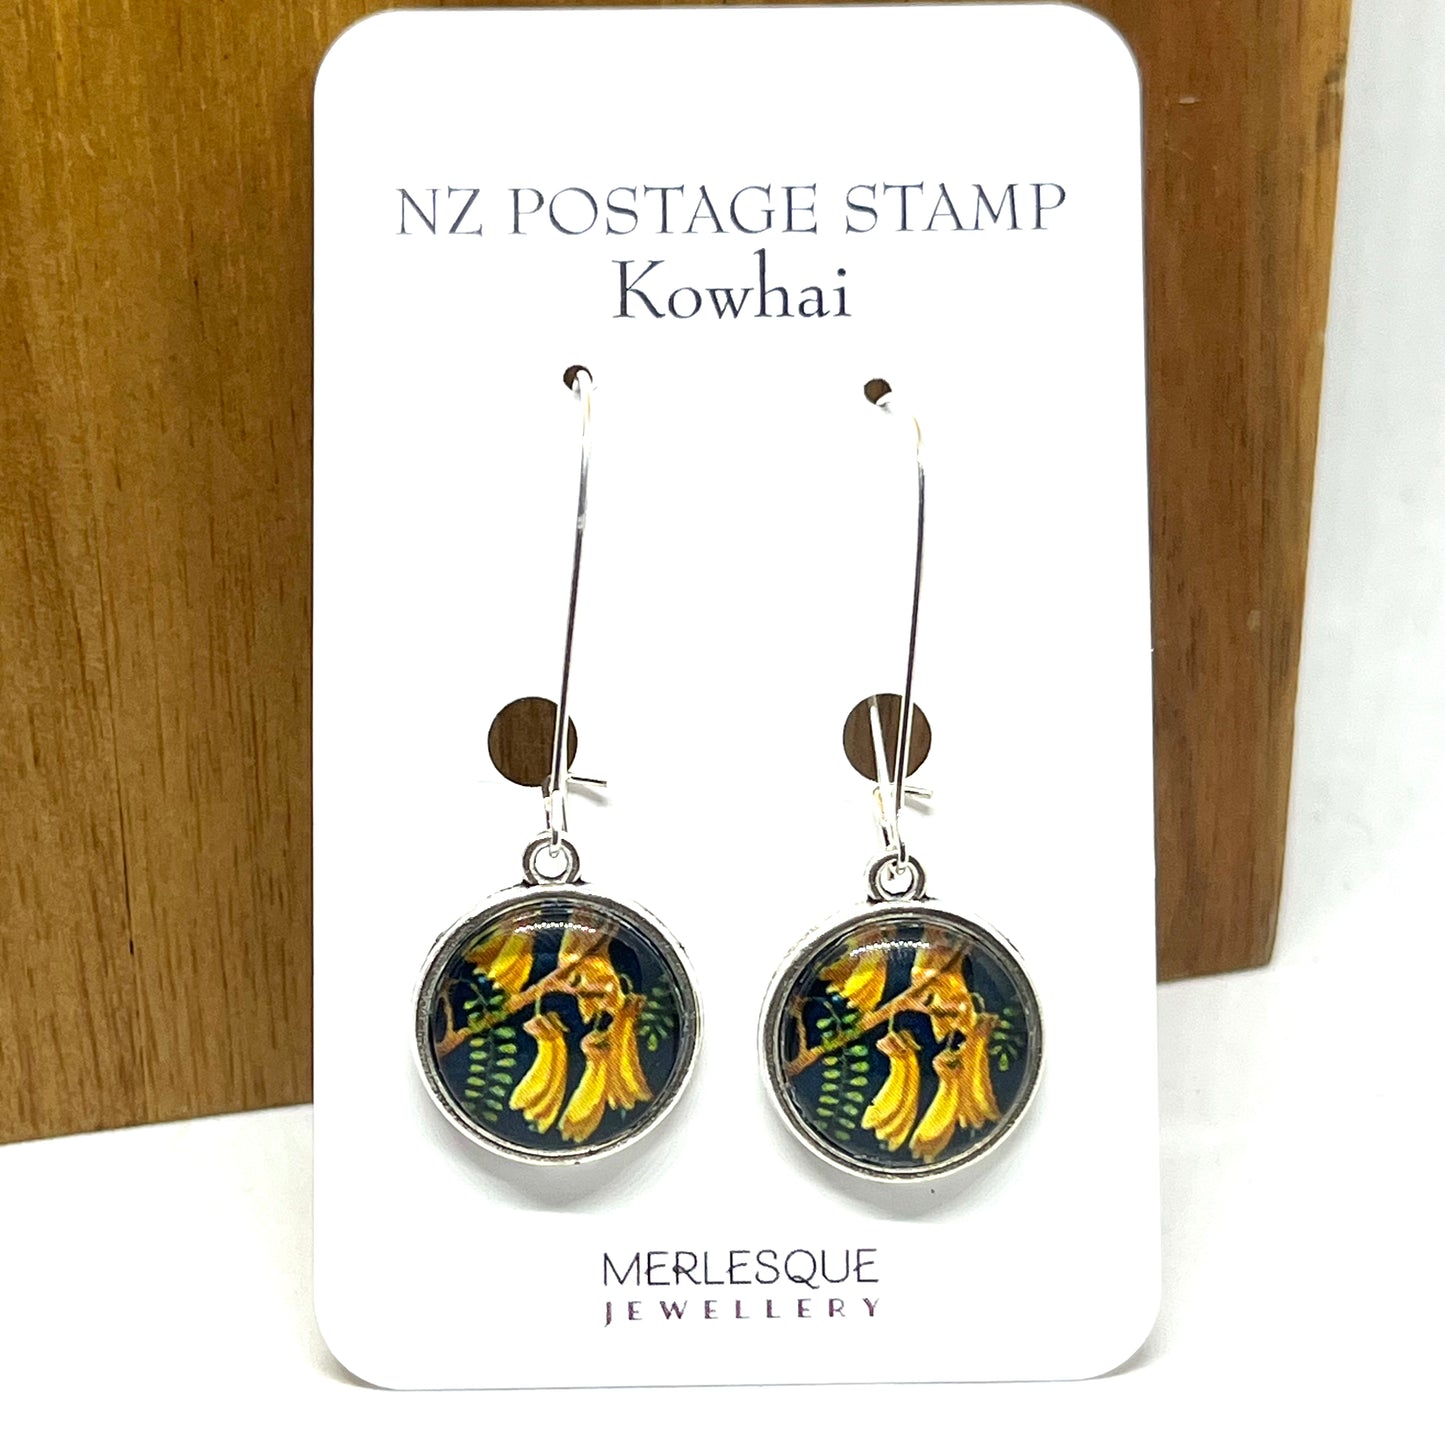 Kowhai stamp image on long silver earring hooks